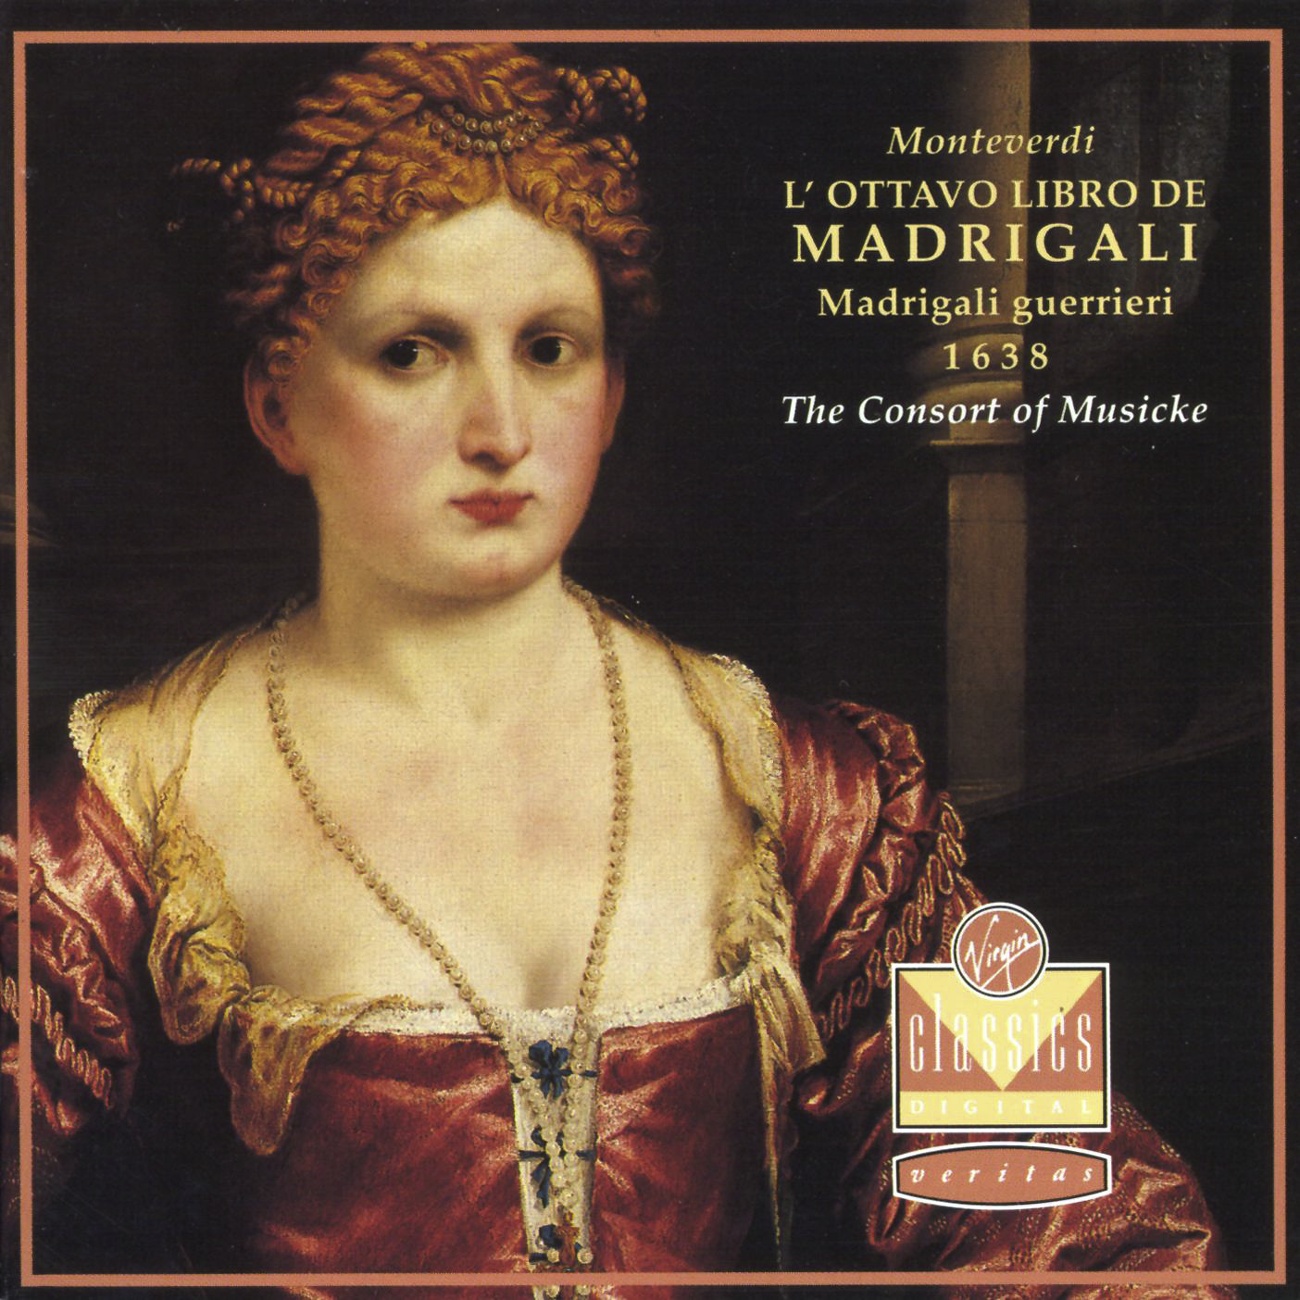 Madrigals, Book 8 (Madrigali guerrieri et amorosi...libro ottavo), Madrigali guerrieri, Altri canti d'amor: Sinfonia "Altri cant